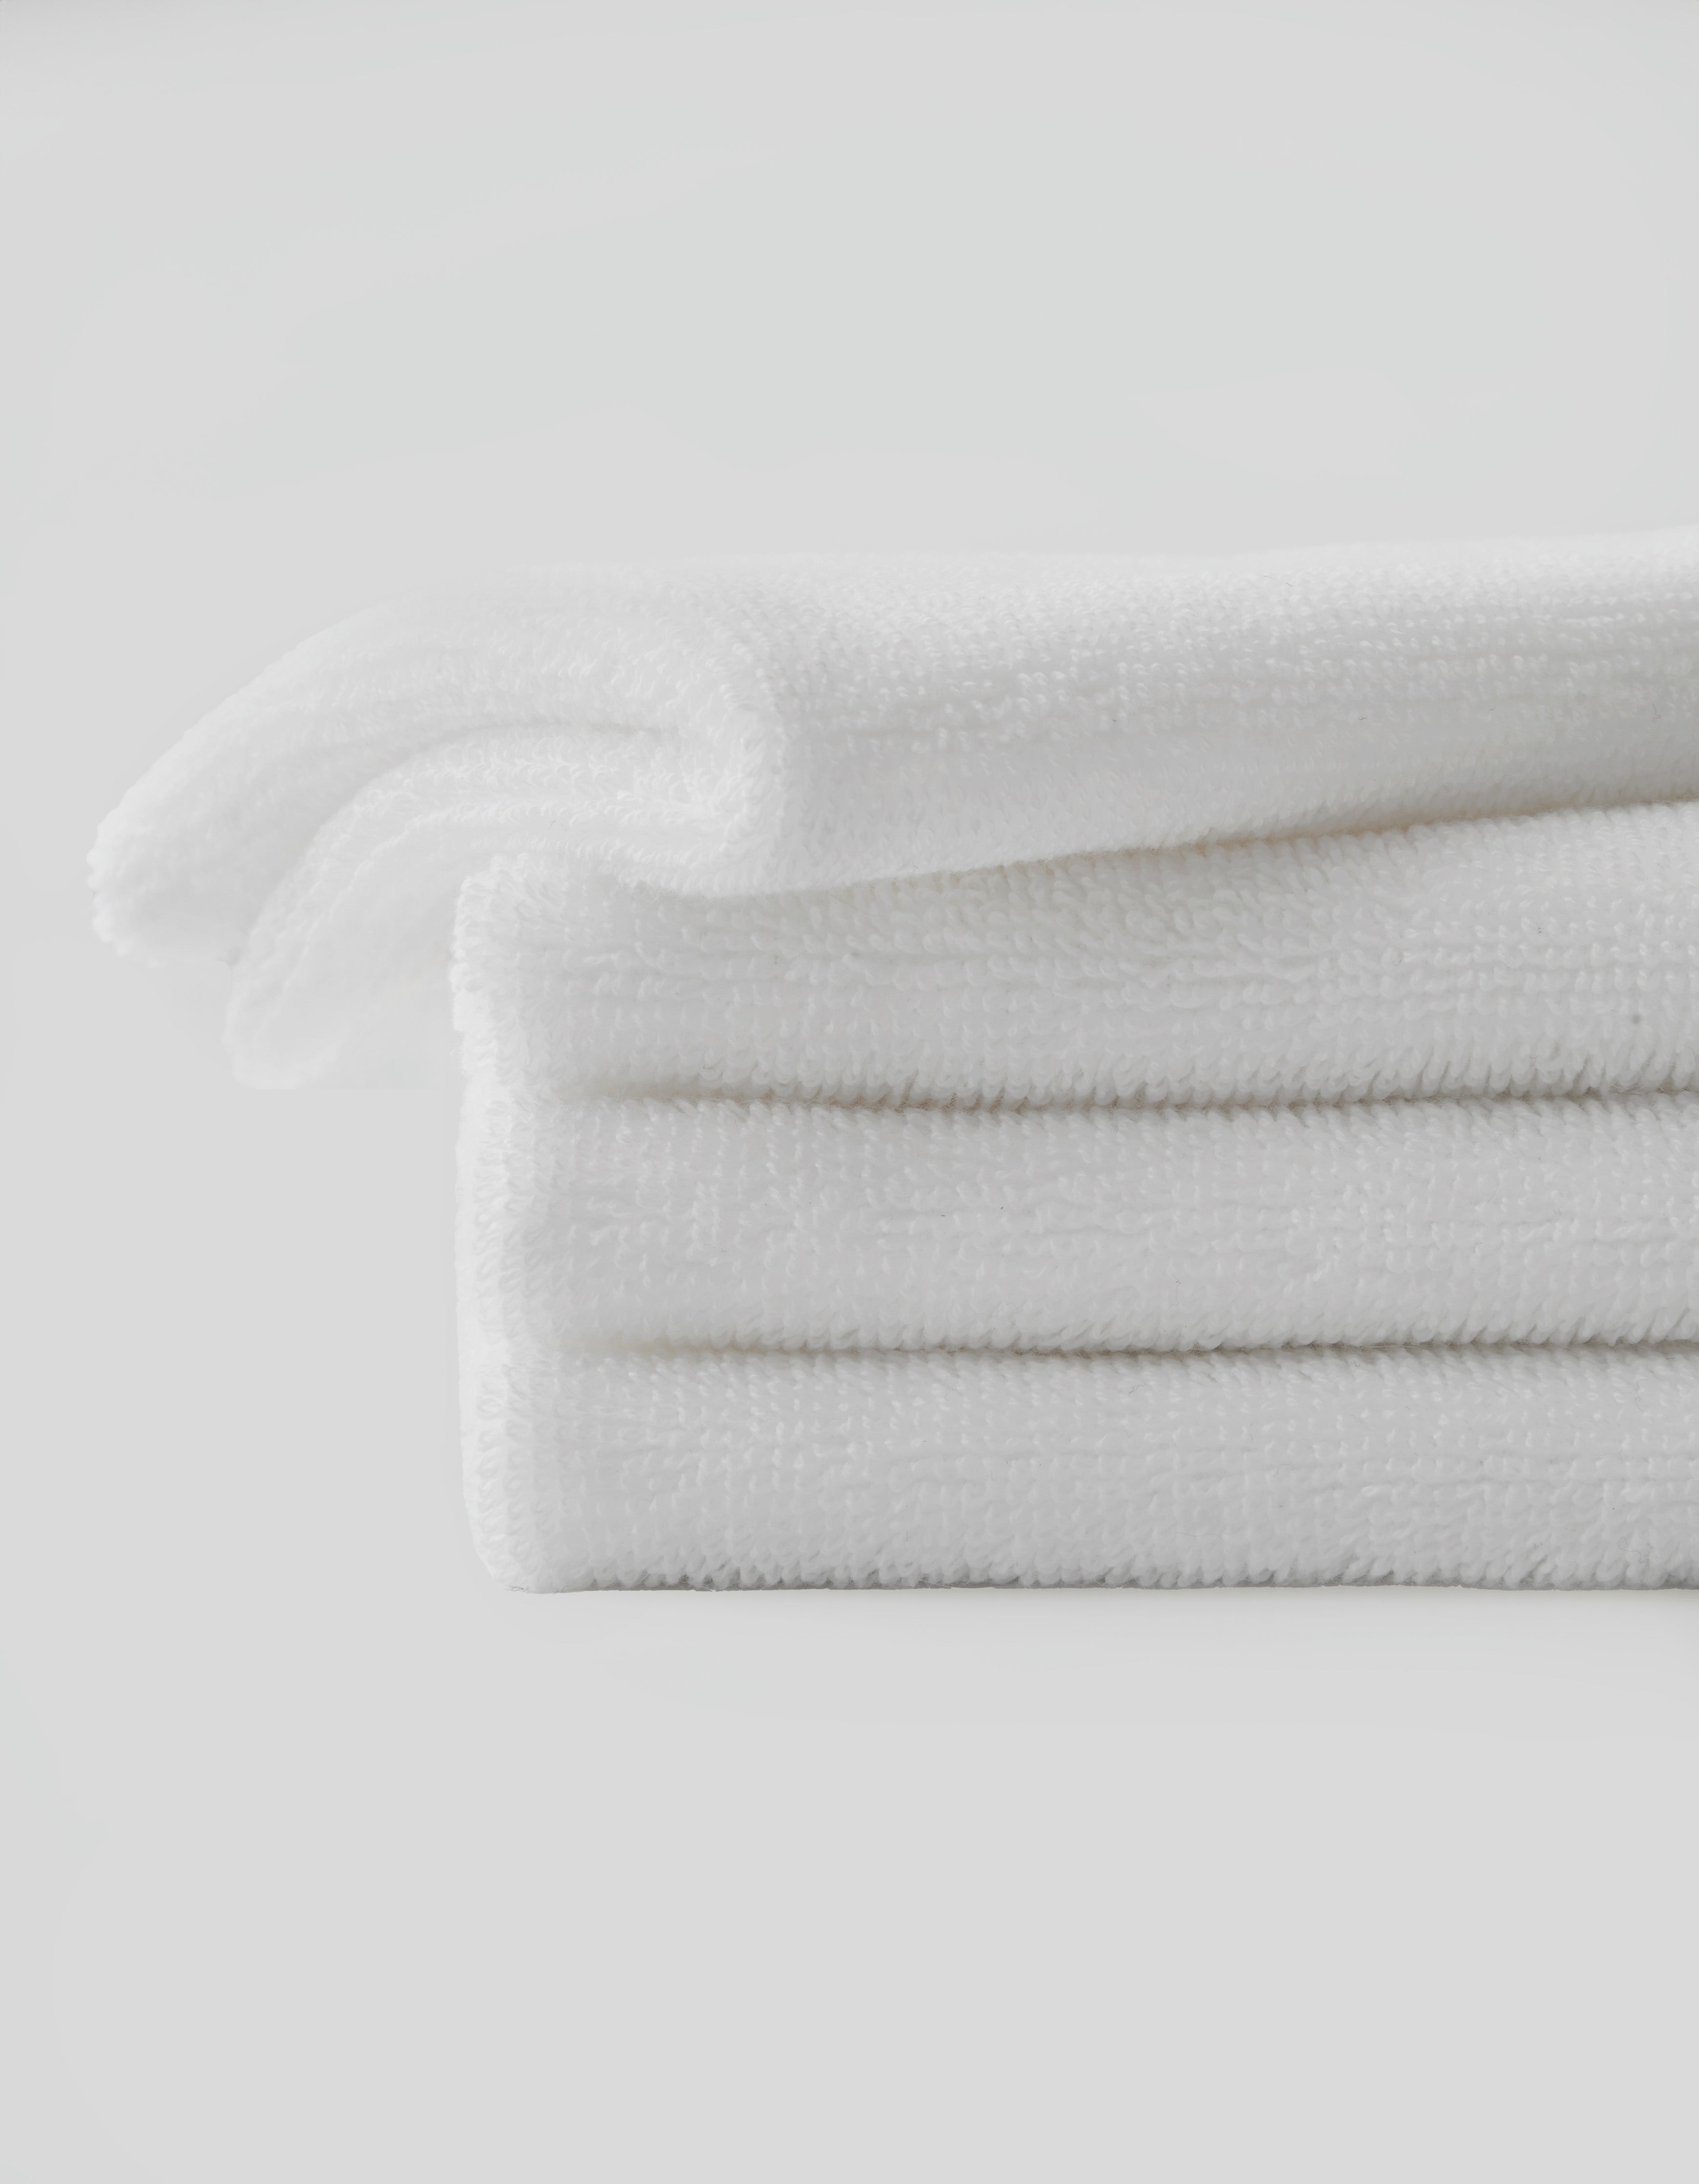 A neatly folded stack of three white towels from Cozy Earth's Revitalizing Pair set is placed against a plain white background. The towels appear soft and fluffy, with a clean, fresh look. The arrangement emphasizes their texture and pristine condition.